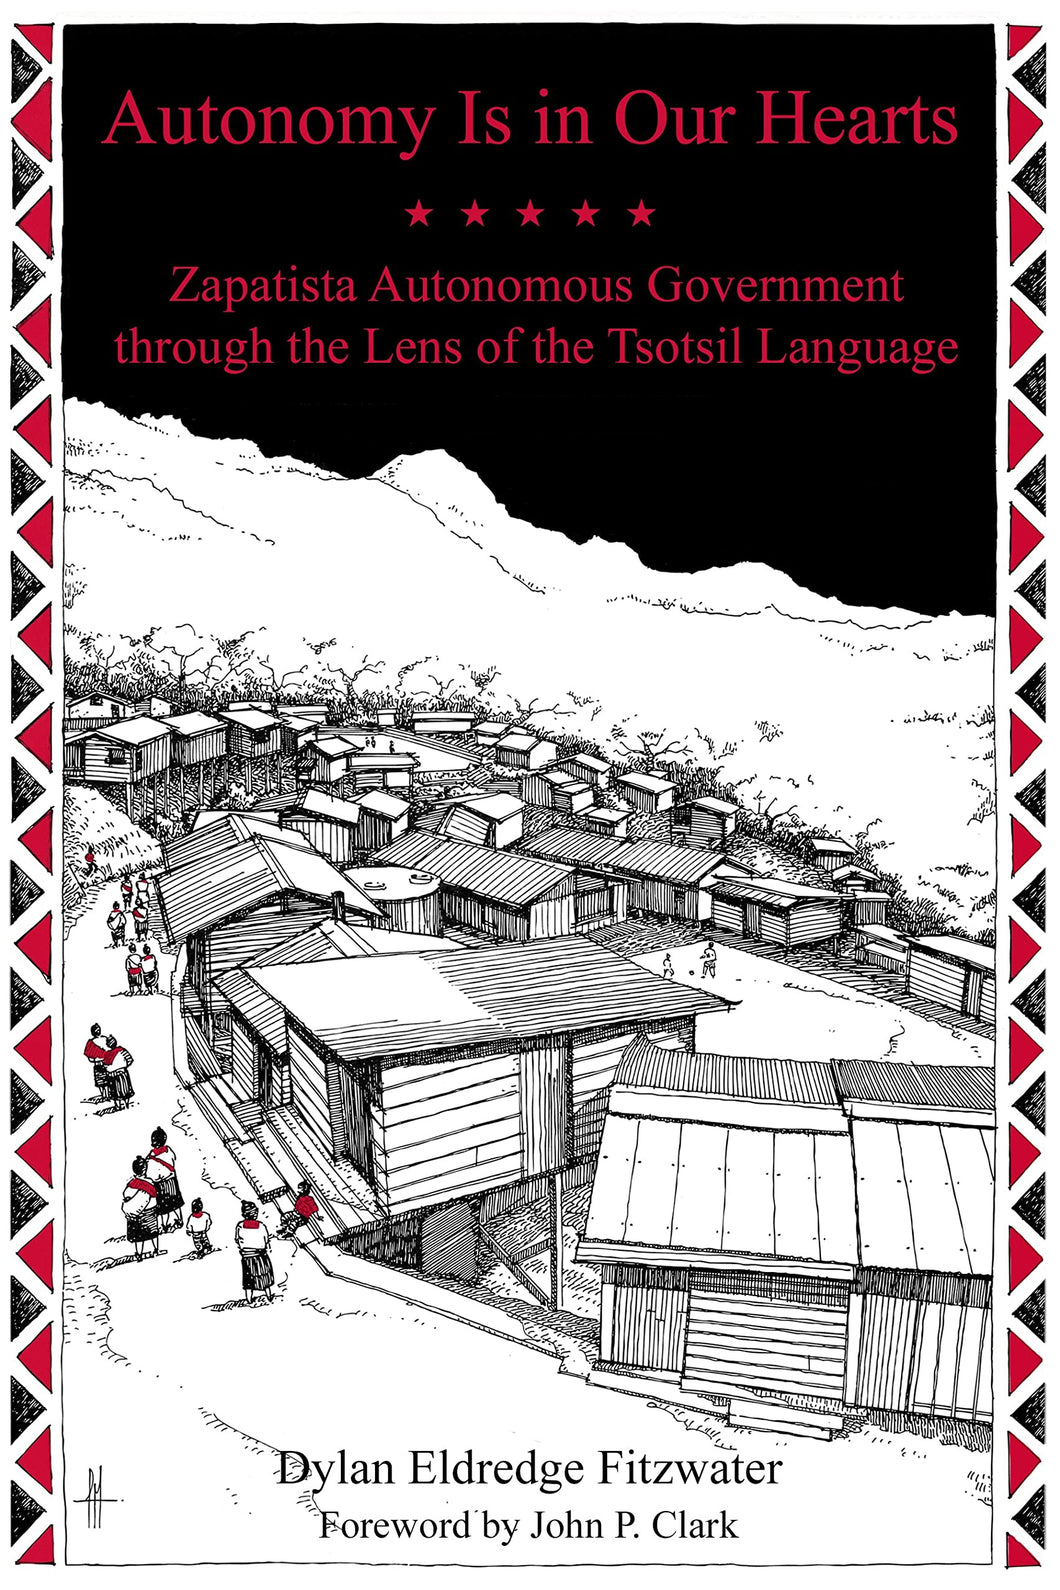 Autonomy Is in Our Hearts: Zapatista Autonomous Government through the Lens of the Tsotsil Language by Dylan Eldredge Fitzwater